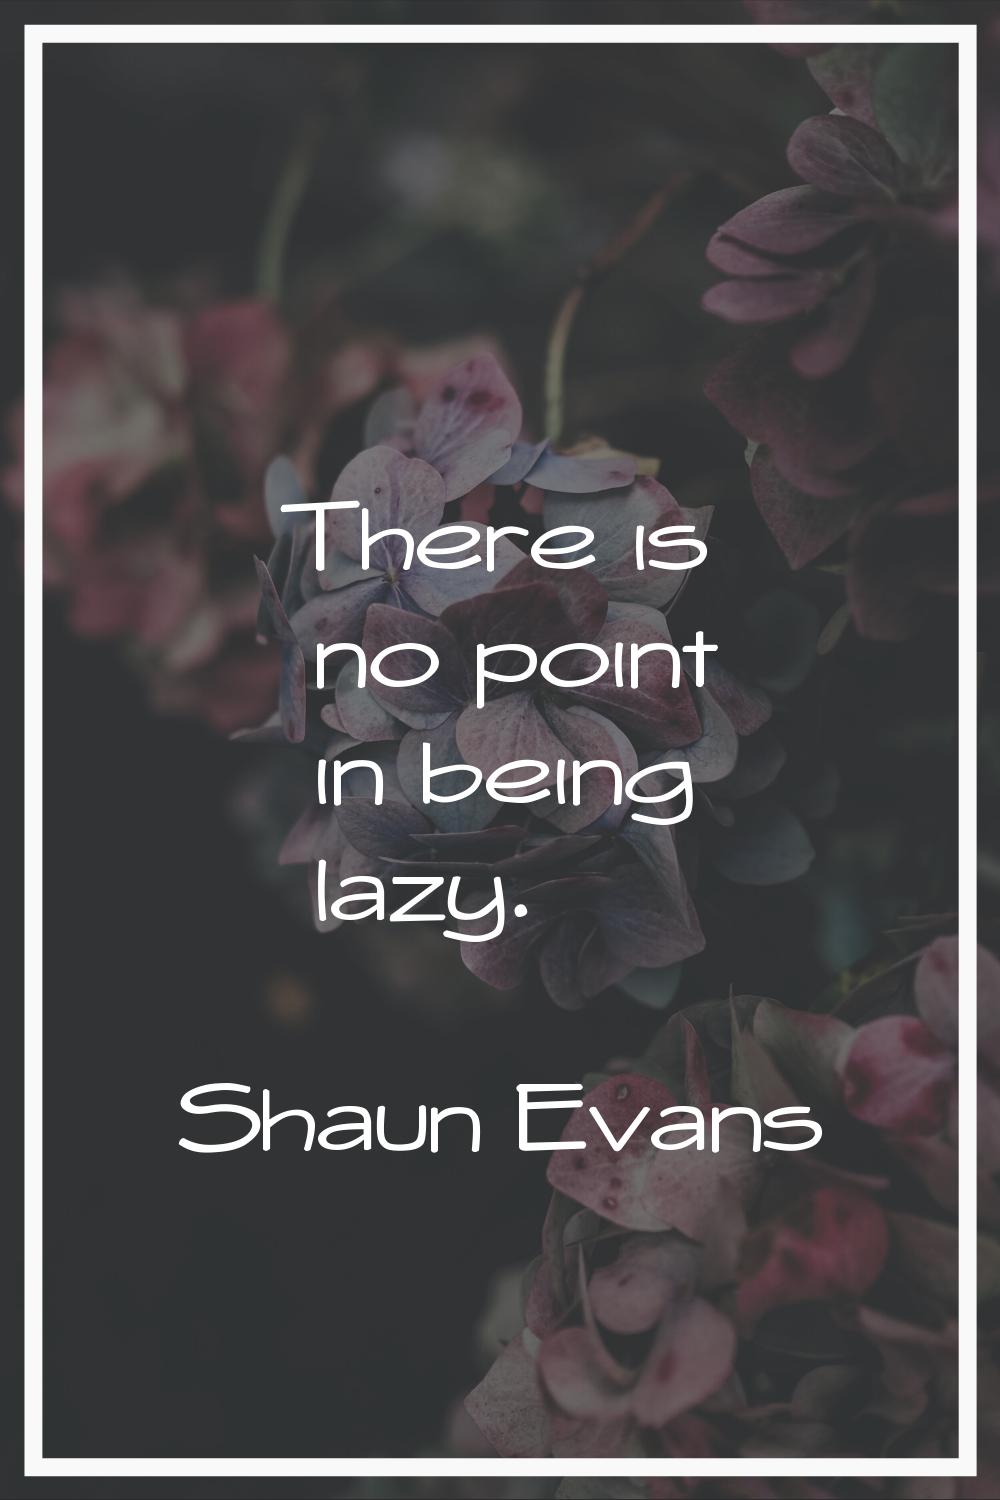 There is no point in being lazy.